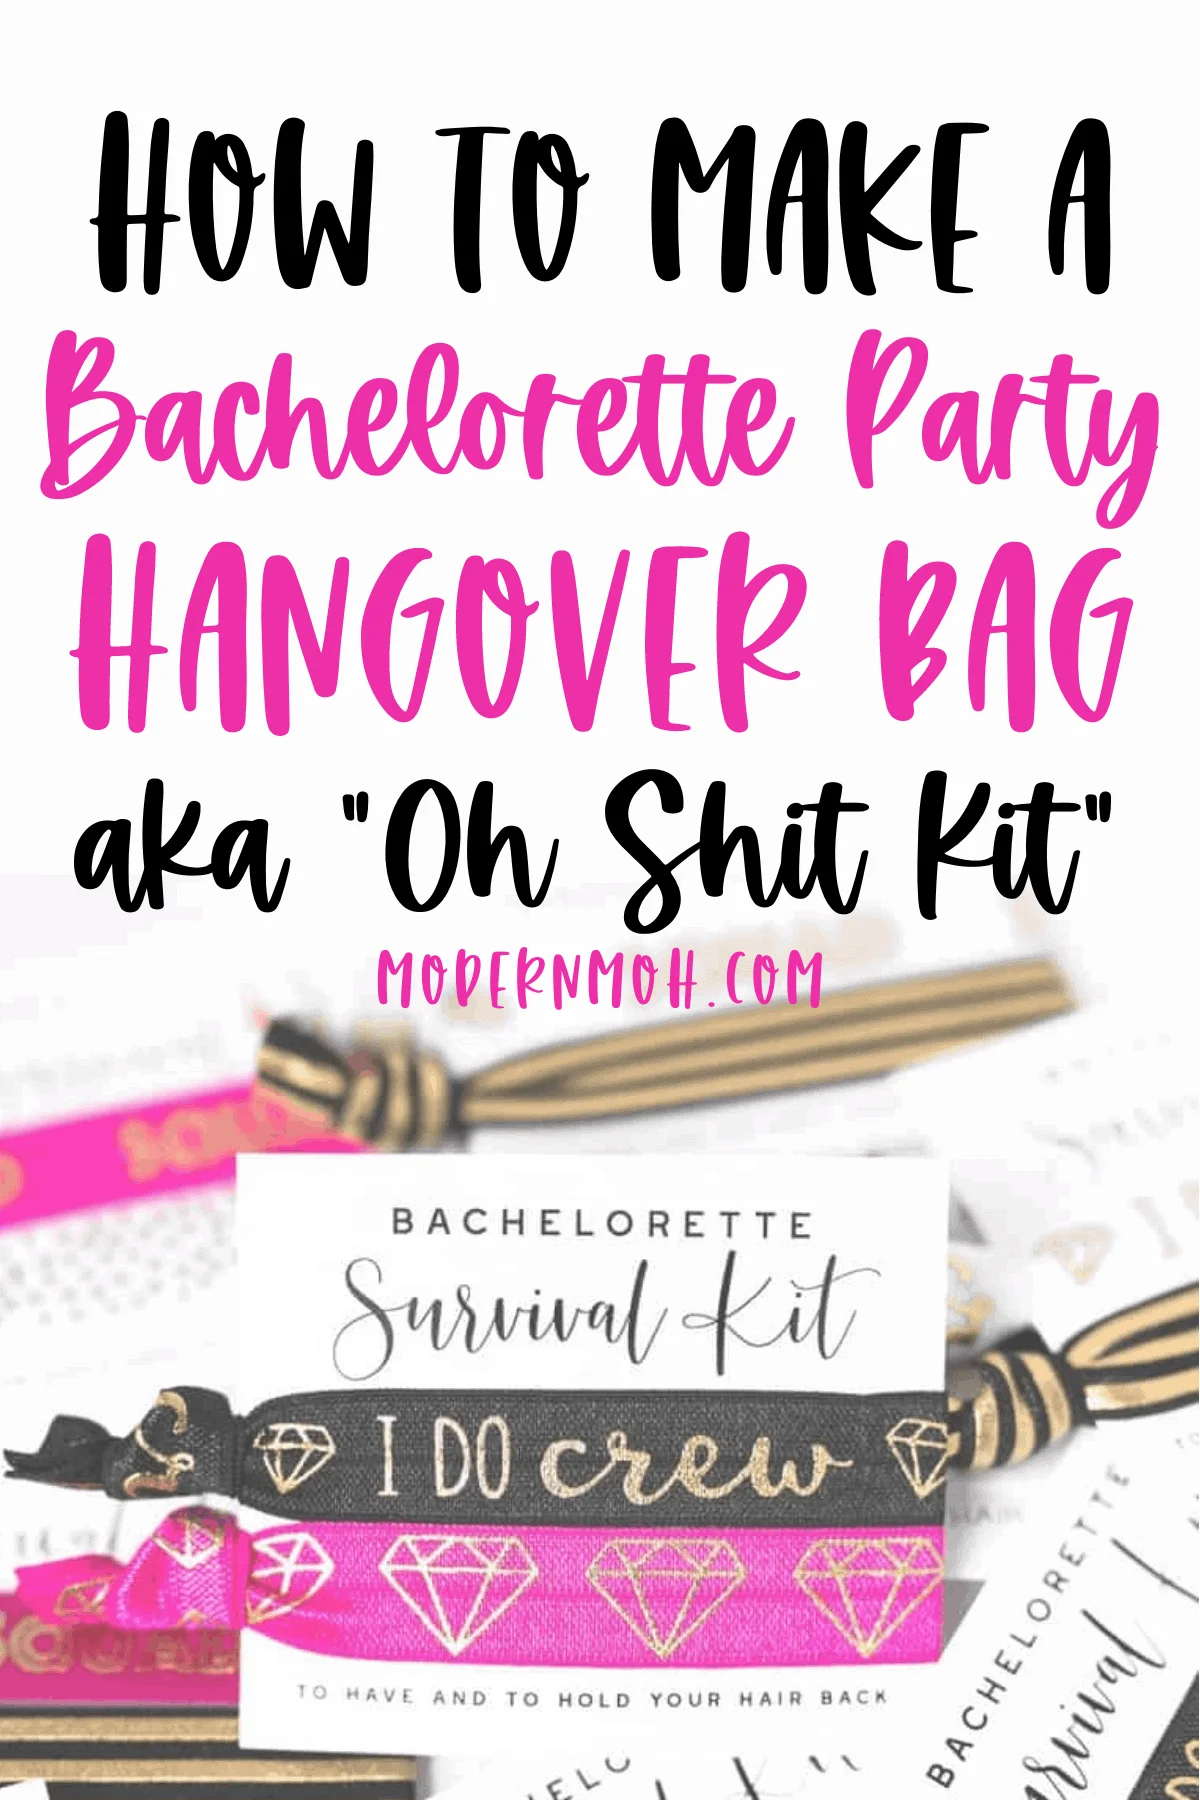 Survival 101 Bachelorette Game: How to Build a Toolkit 